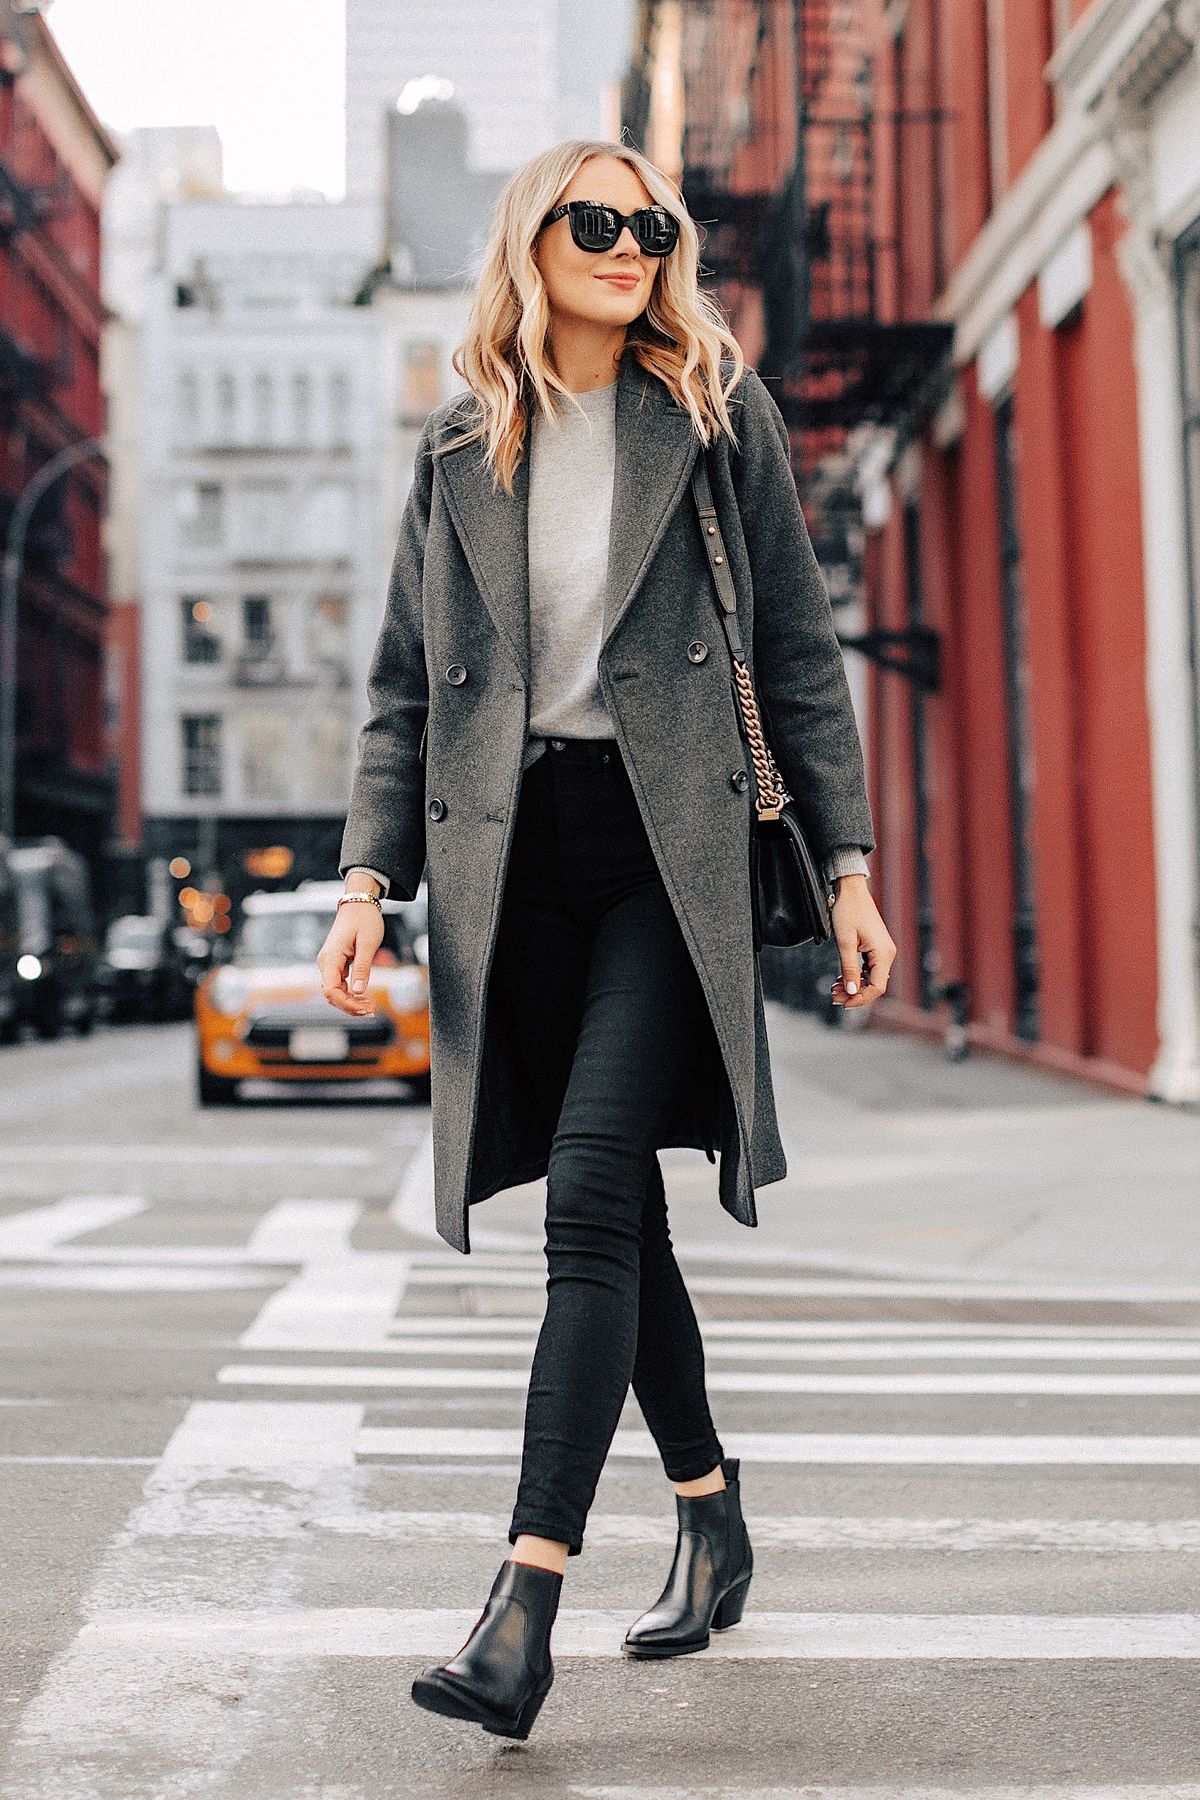 Everlane Winter Outfit in NYC | Fashion Jackson - Everlane Winter Outfit in NYC | Fashion Jackson -   18 style Winter chic ideas